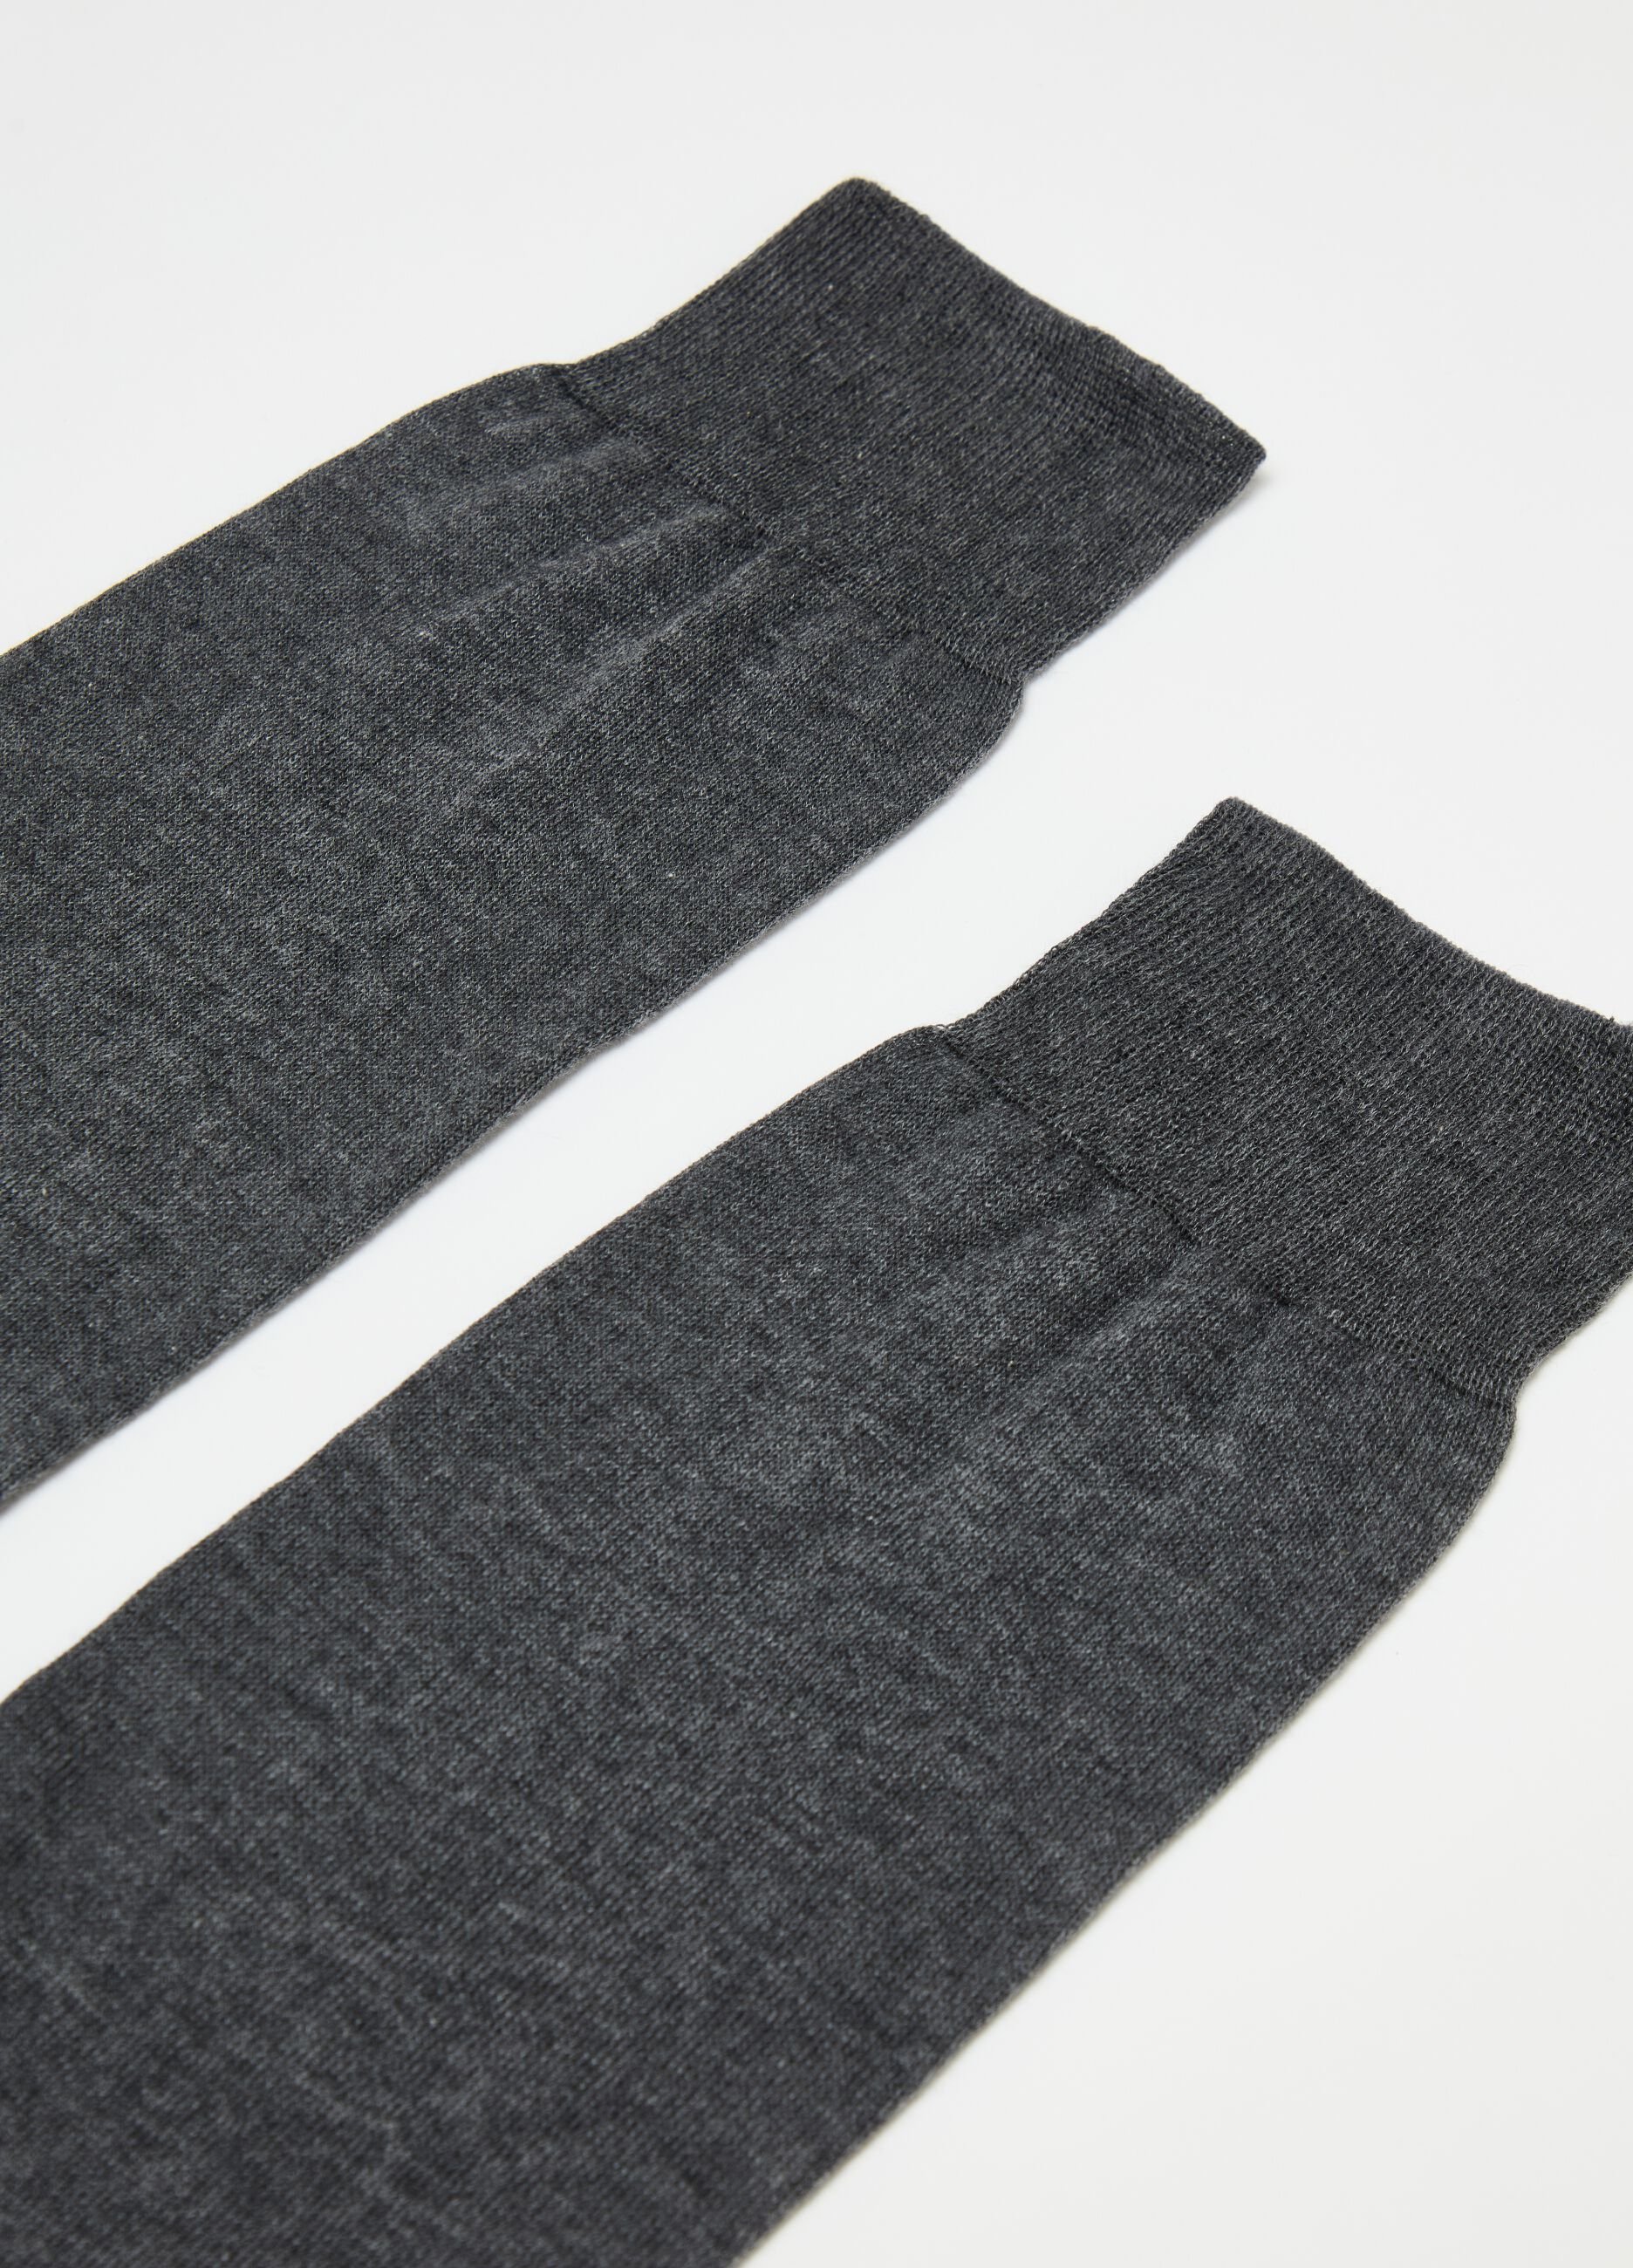 Two-pair pack short socks in Supima cotton